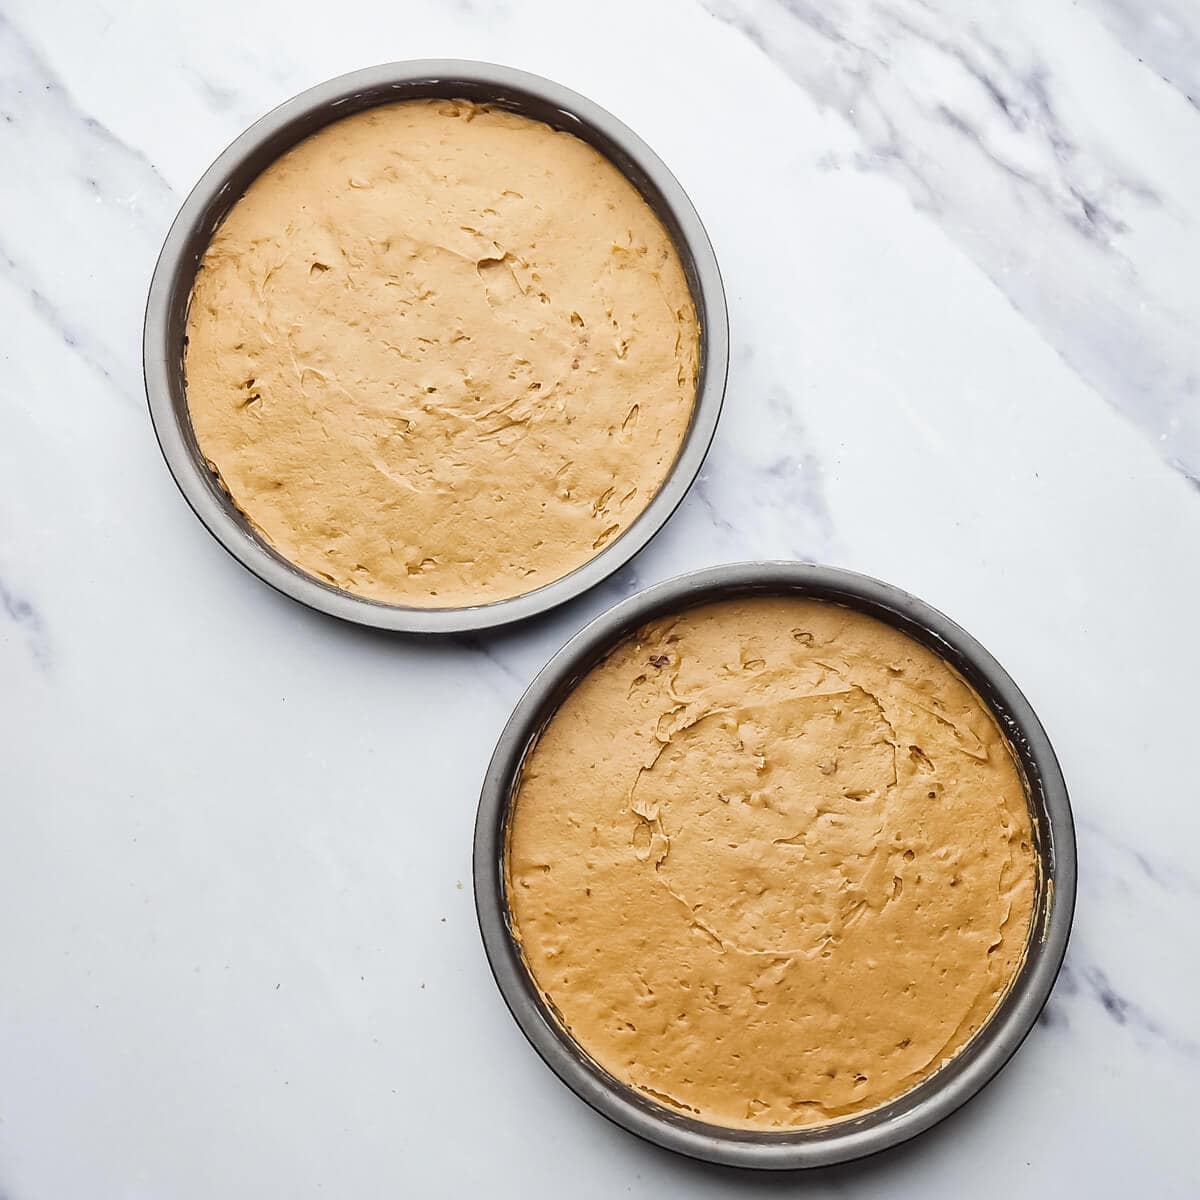 two round baking tins with cake batter inside.